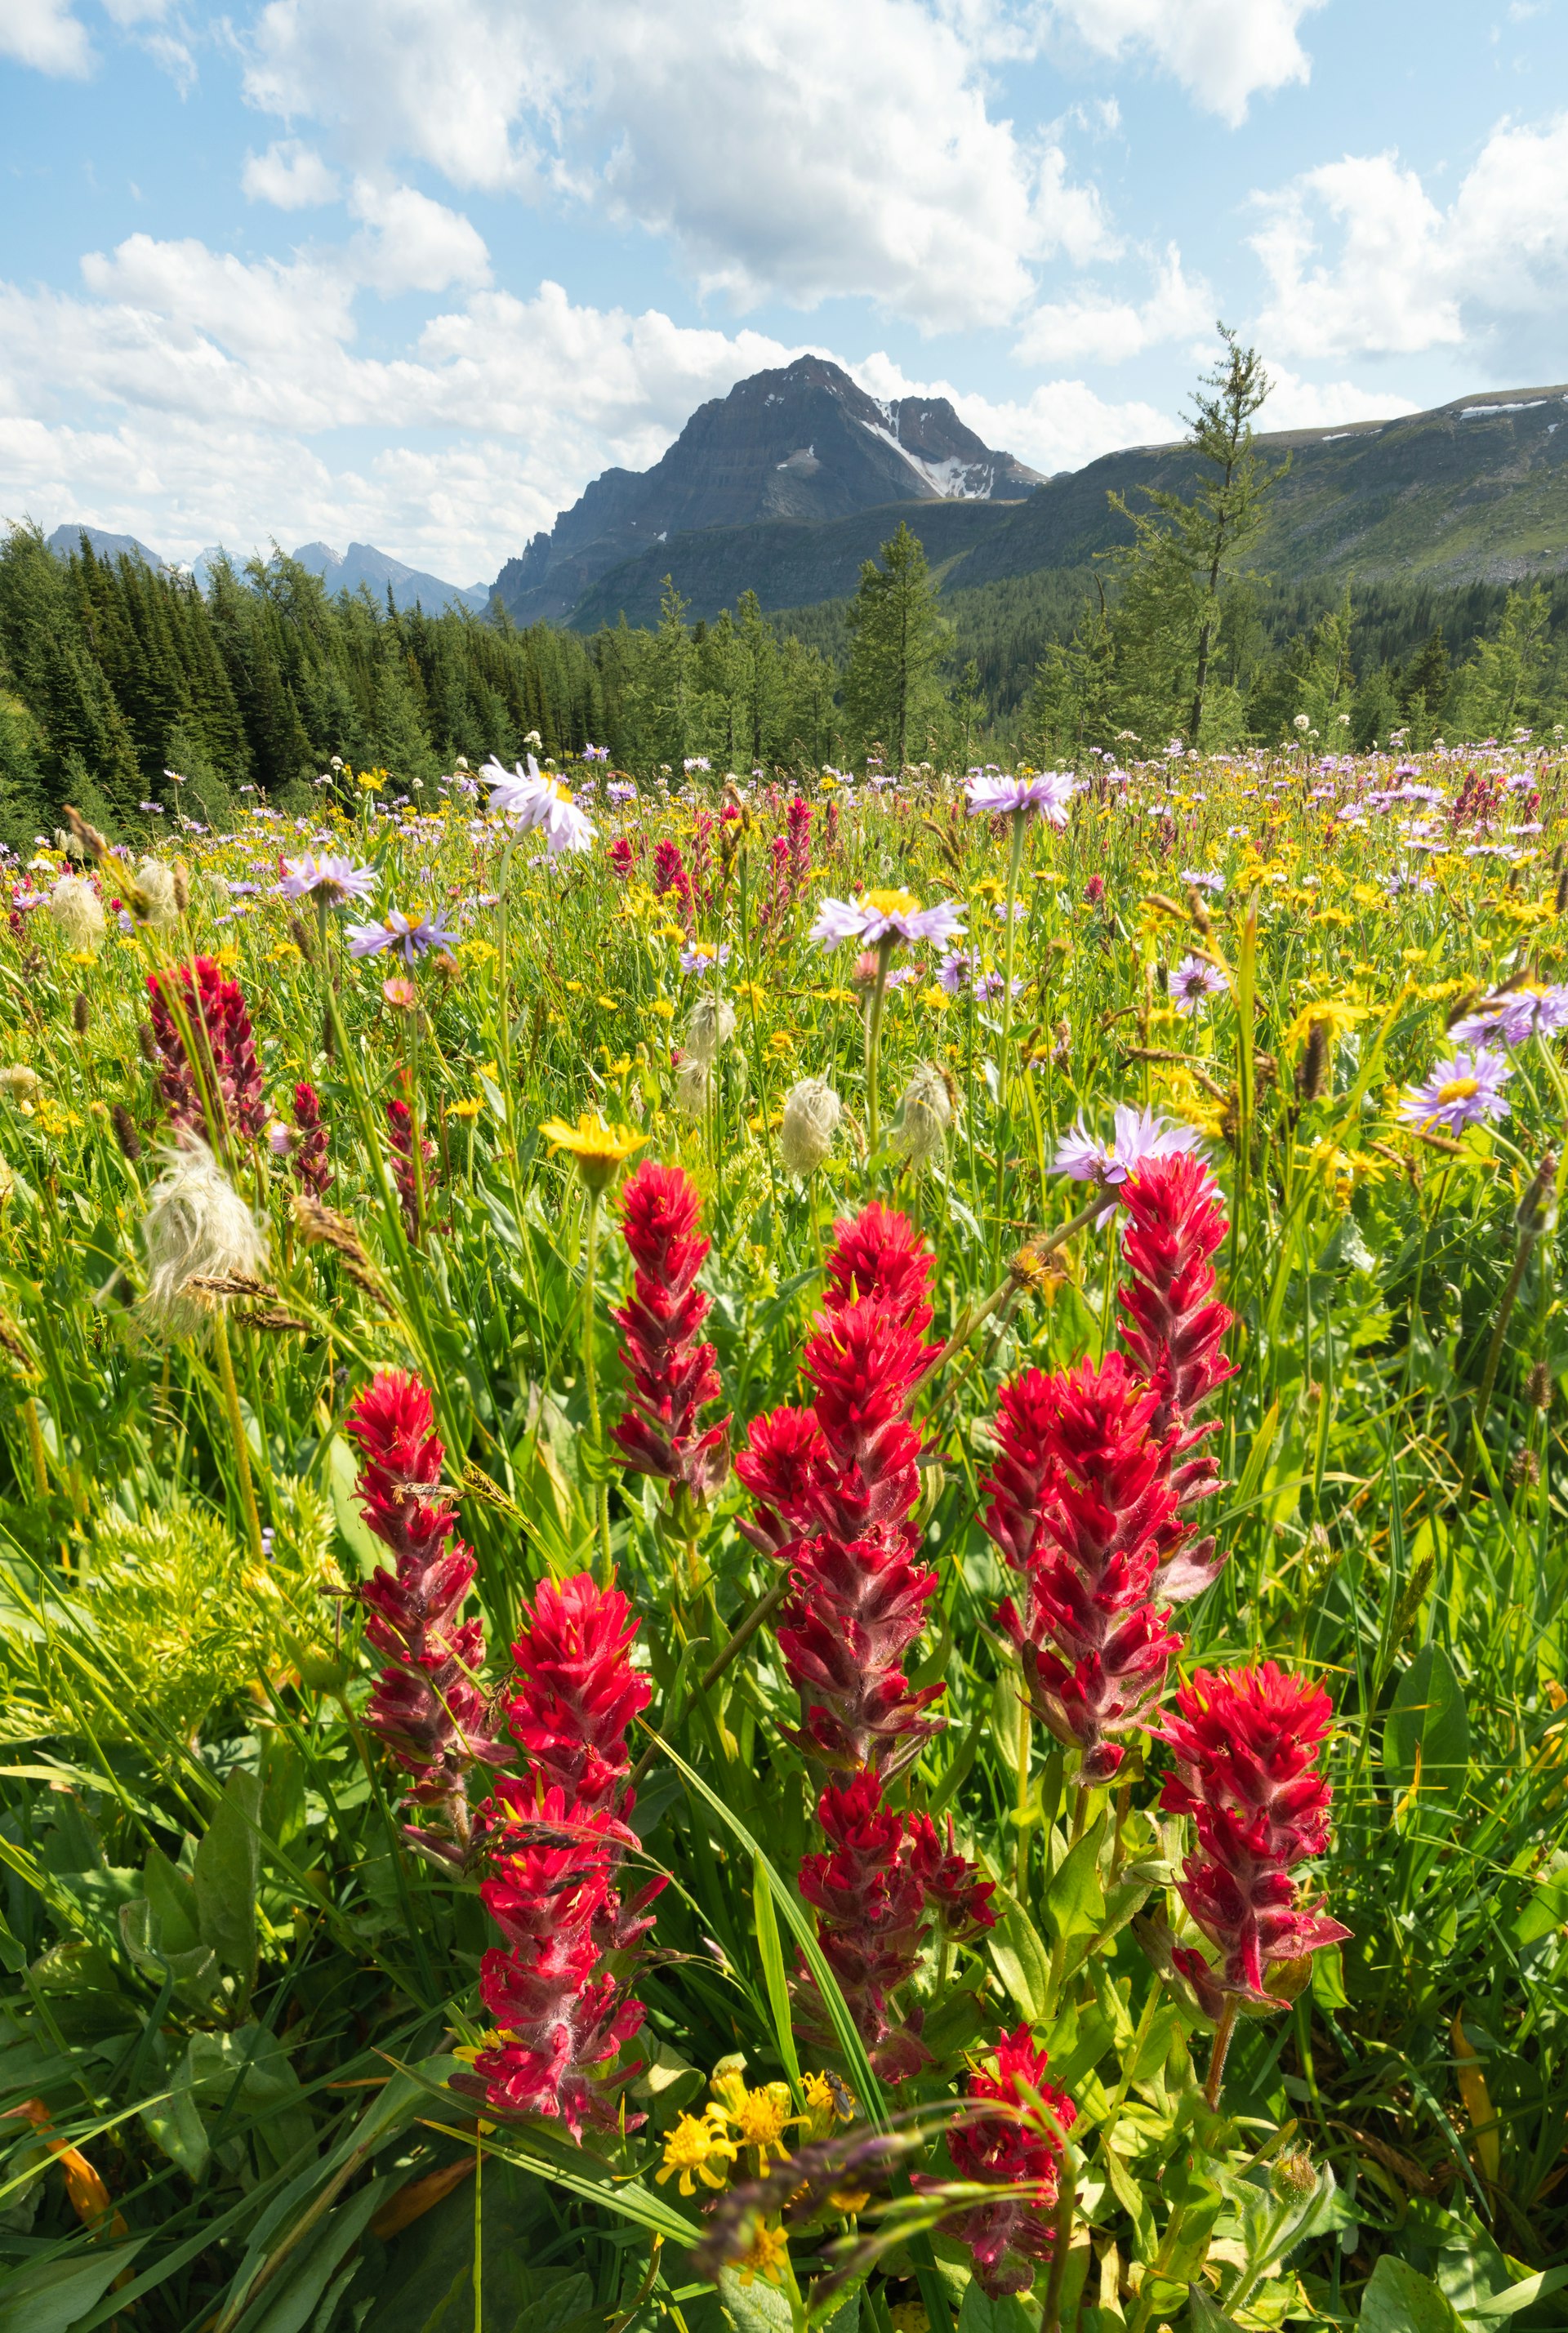 Red Indian paintbrush wildfowers blanket a meadow along the Healy Pass in Banff National Park